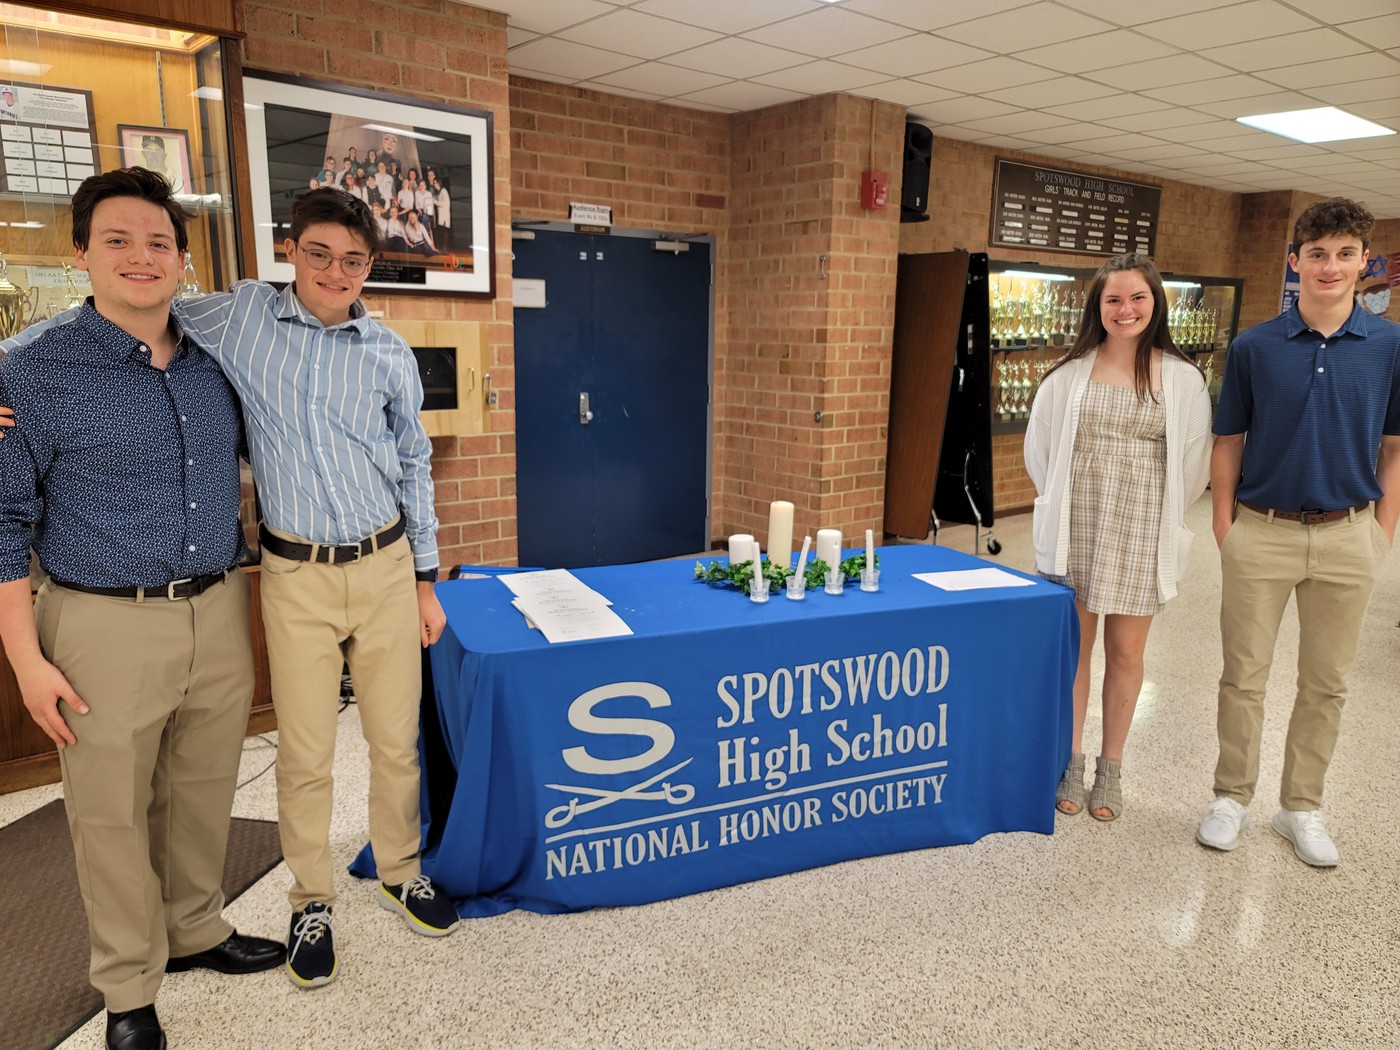 Students standing by National honor society table